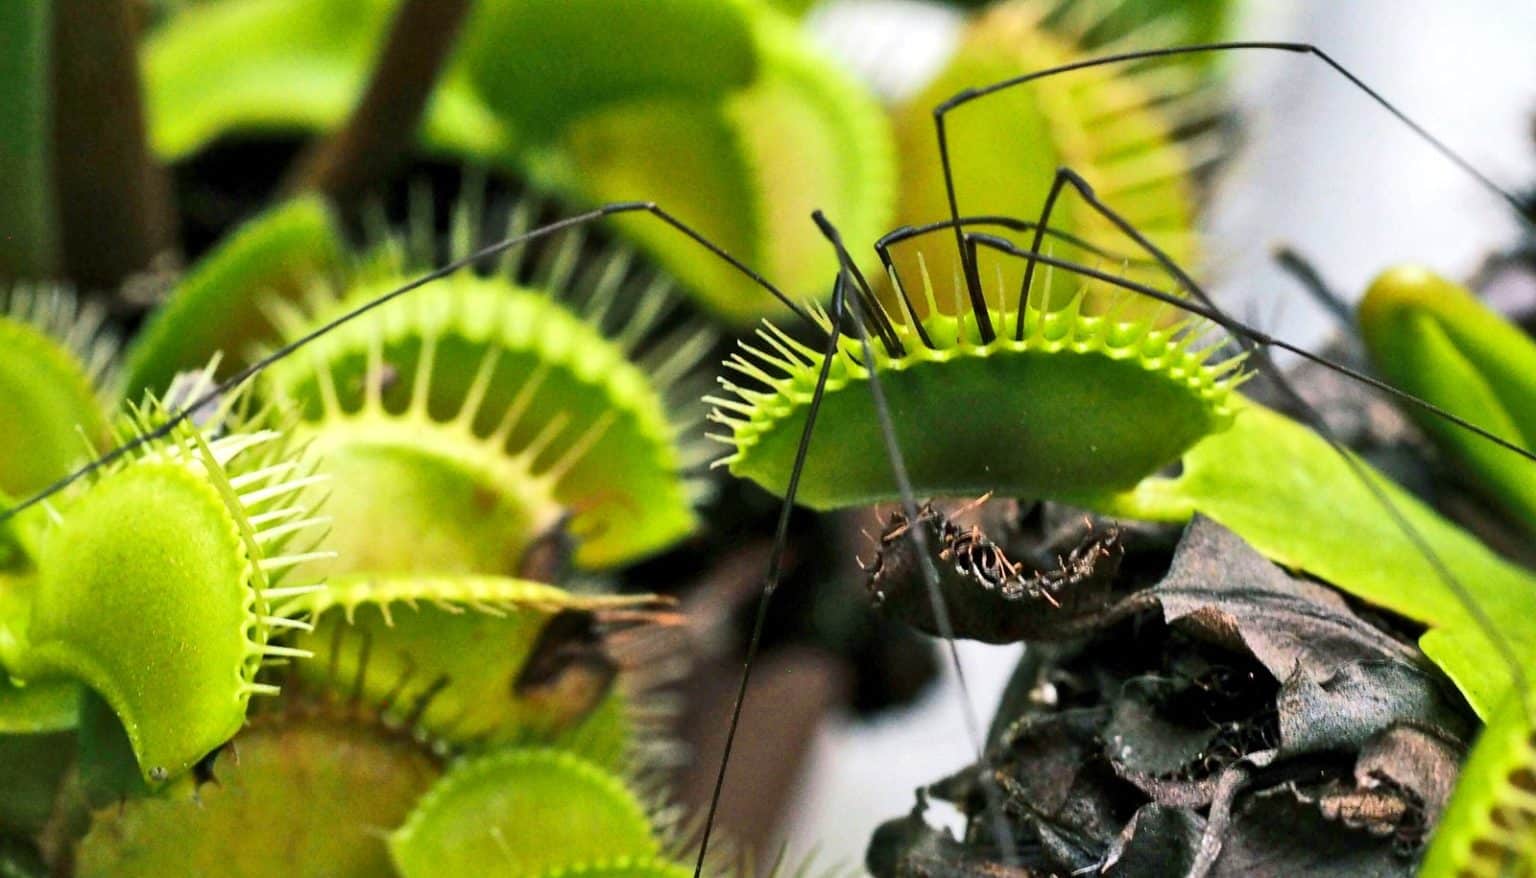 closed venus flytrap leaf with long spider legs sticking out.